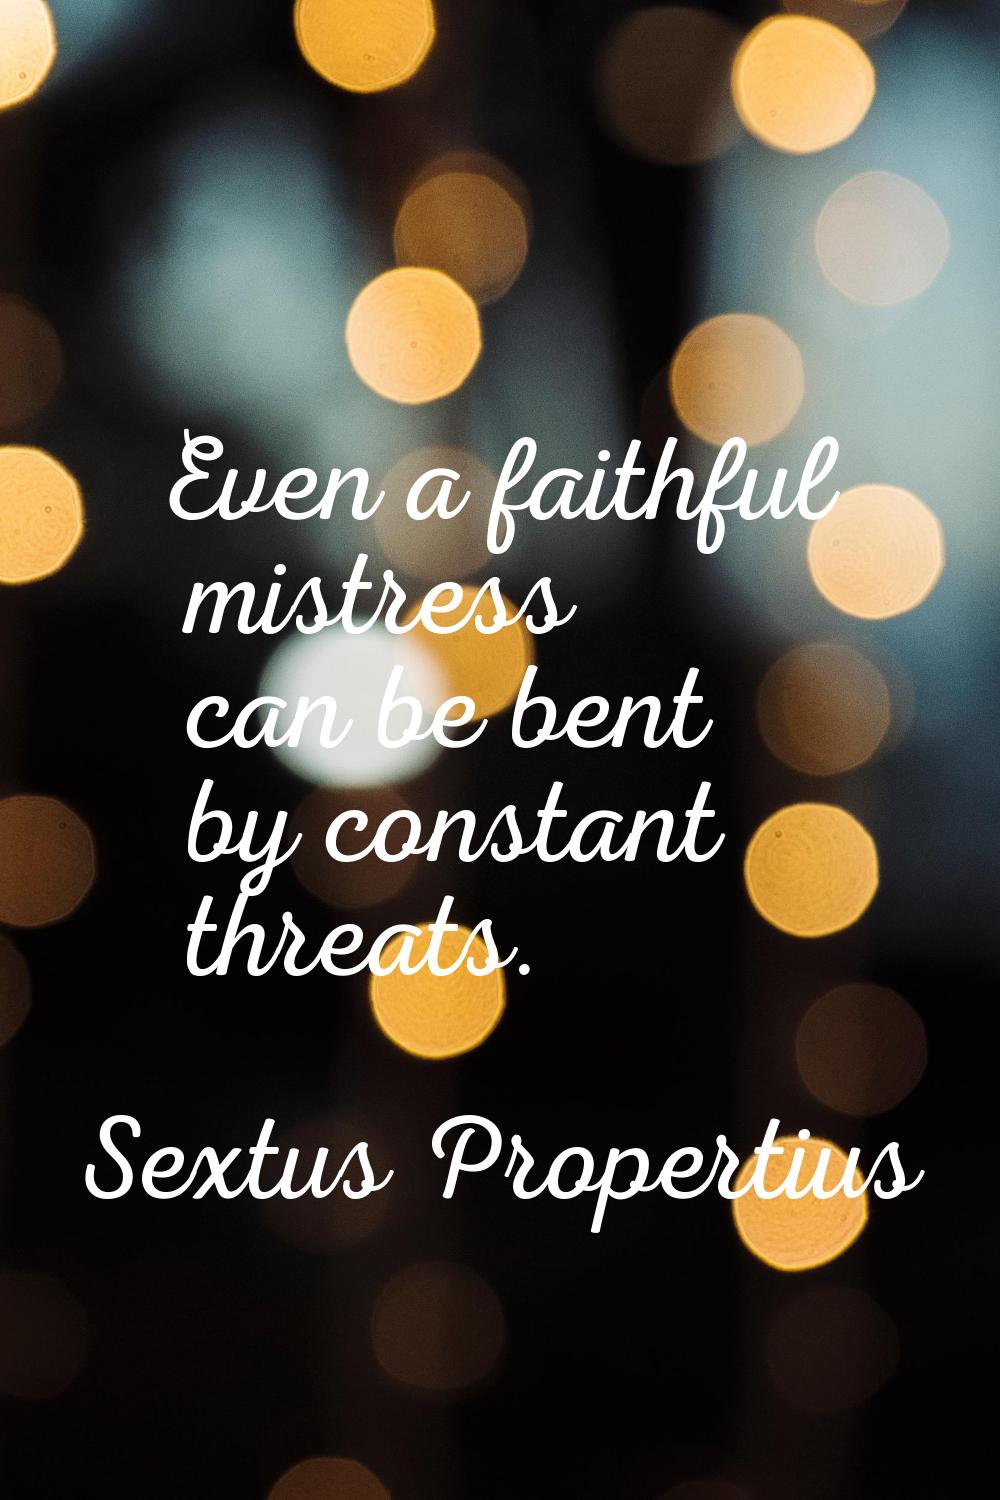 Even a faithful mistress can be bent by constant threats.